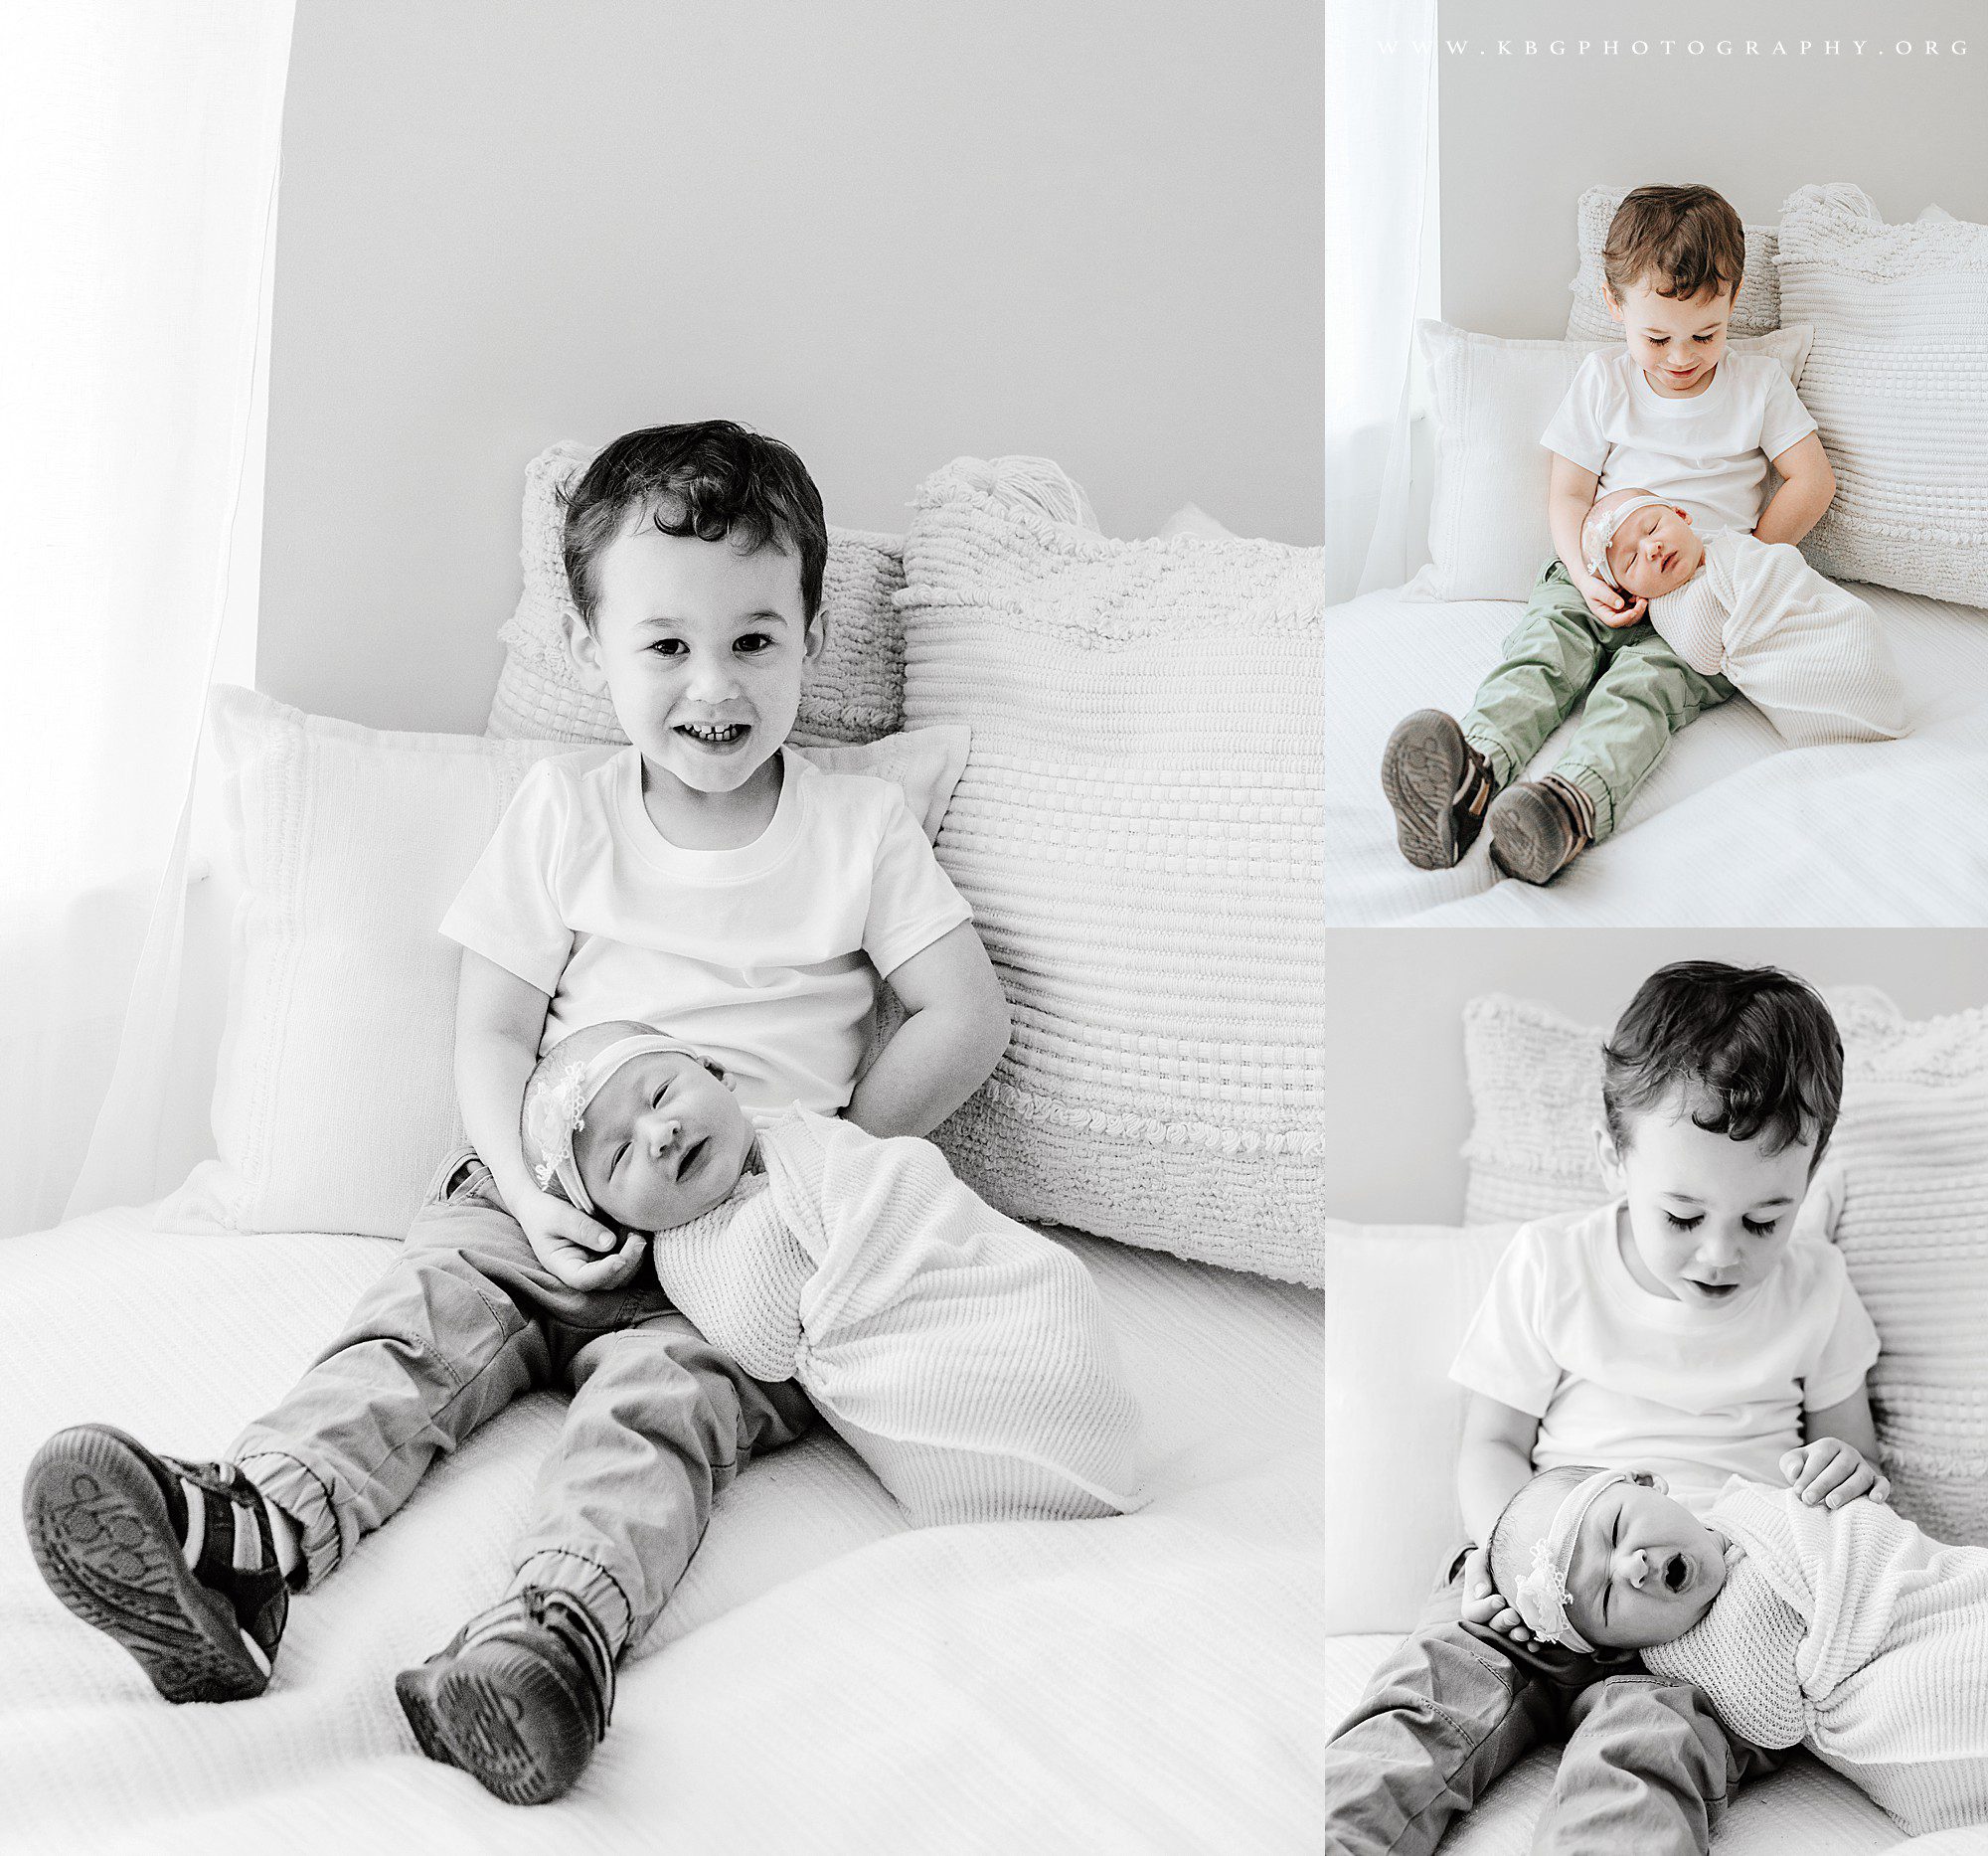 big brother posing with baby sister on bed - atlanta photographer